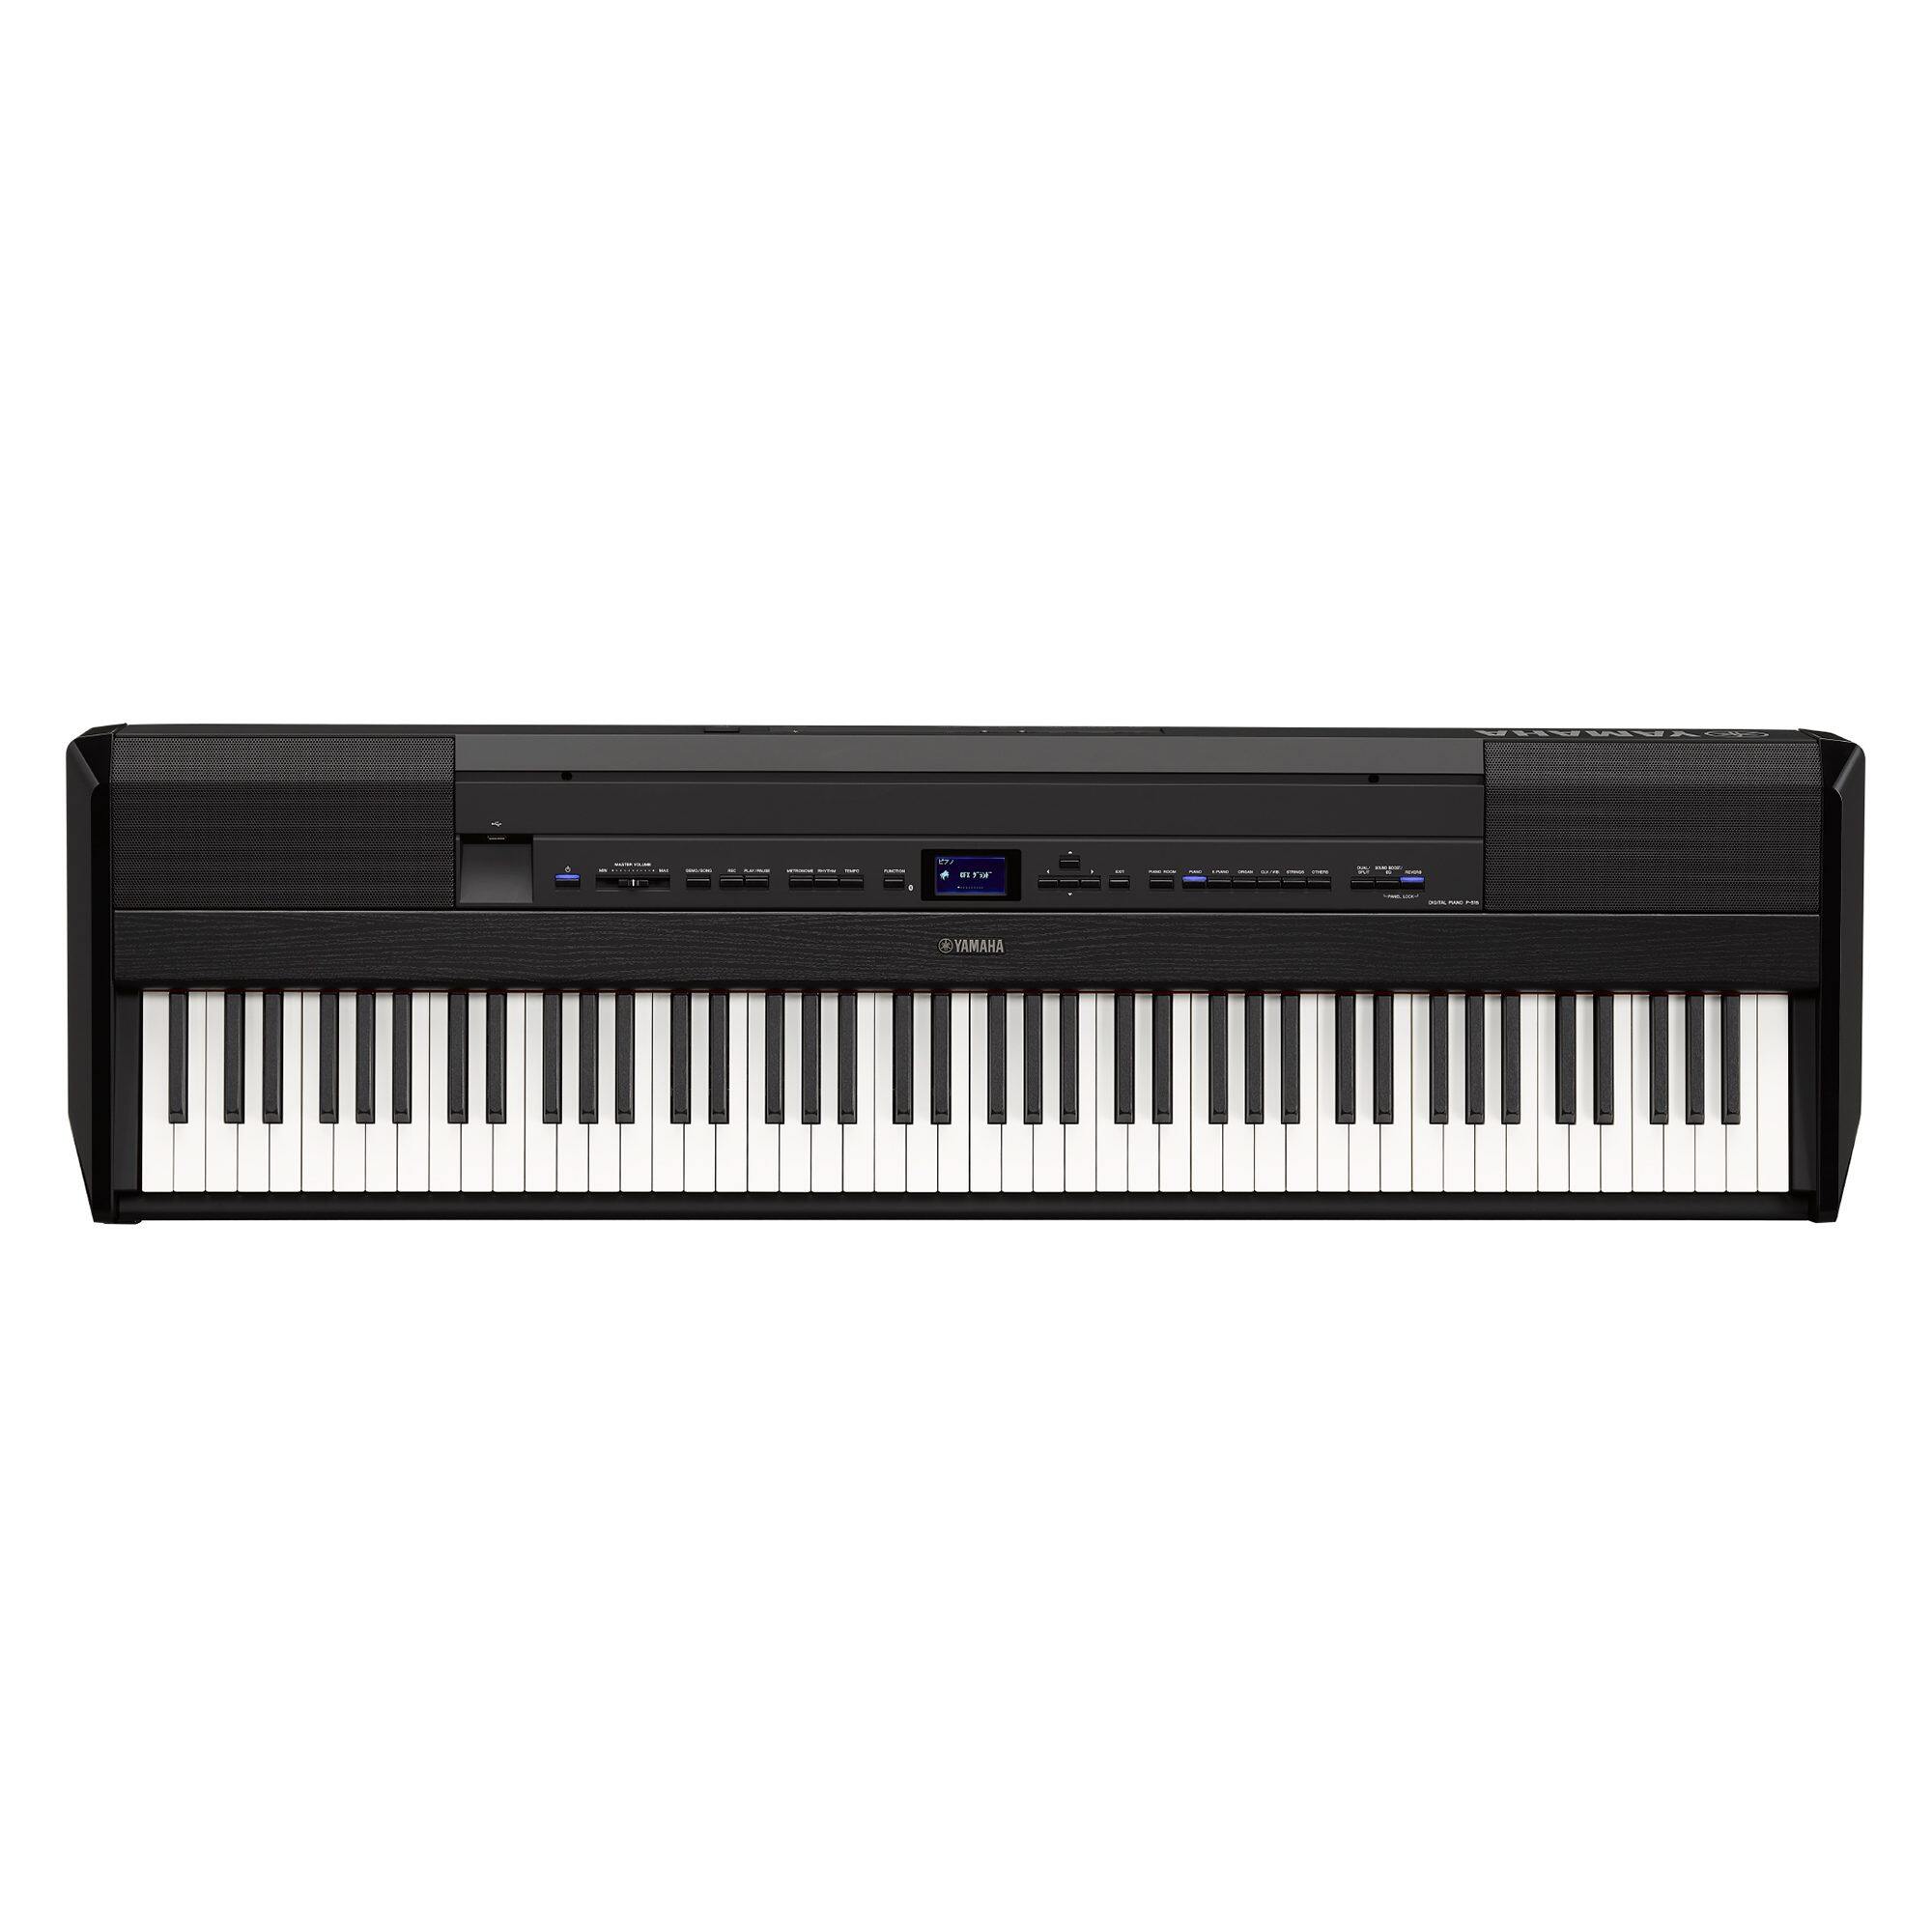 88 keys, high-quality sound, enhanced VRM virtual resonance modeling technology, can connect to the APP keyboard